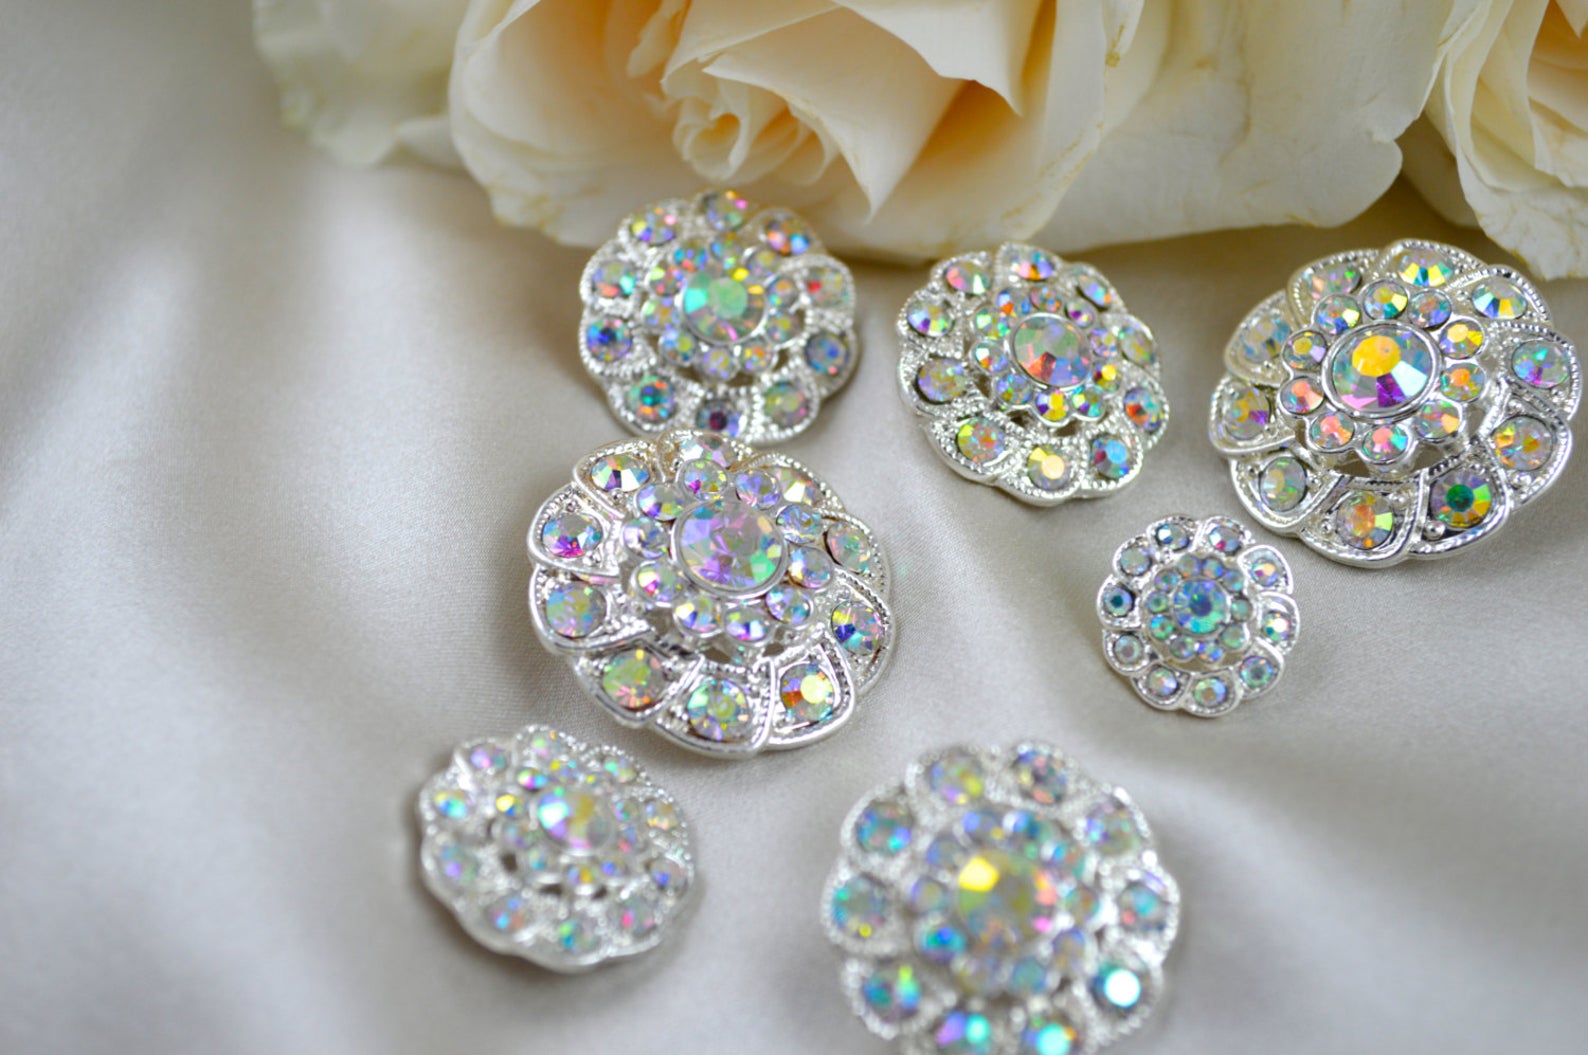 17mm Paola Glass Rhinestone Buttons - 4 pack - Crystal - Trims By